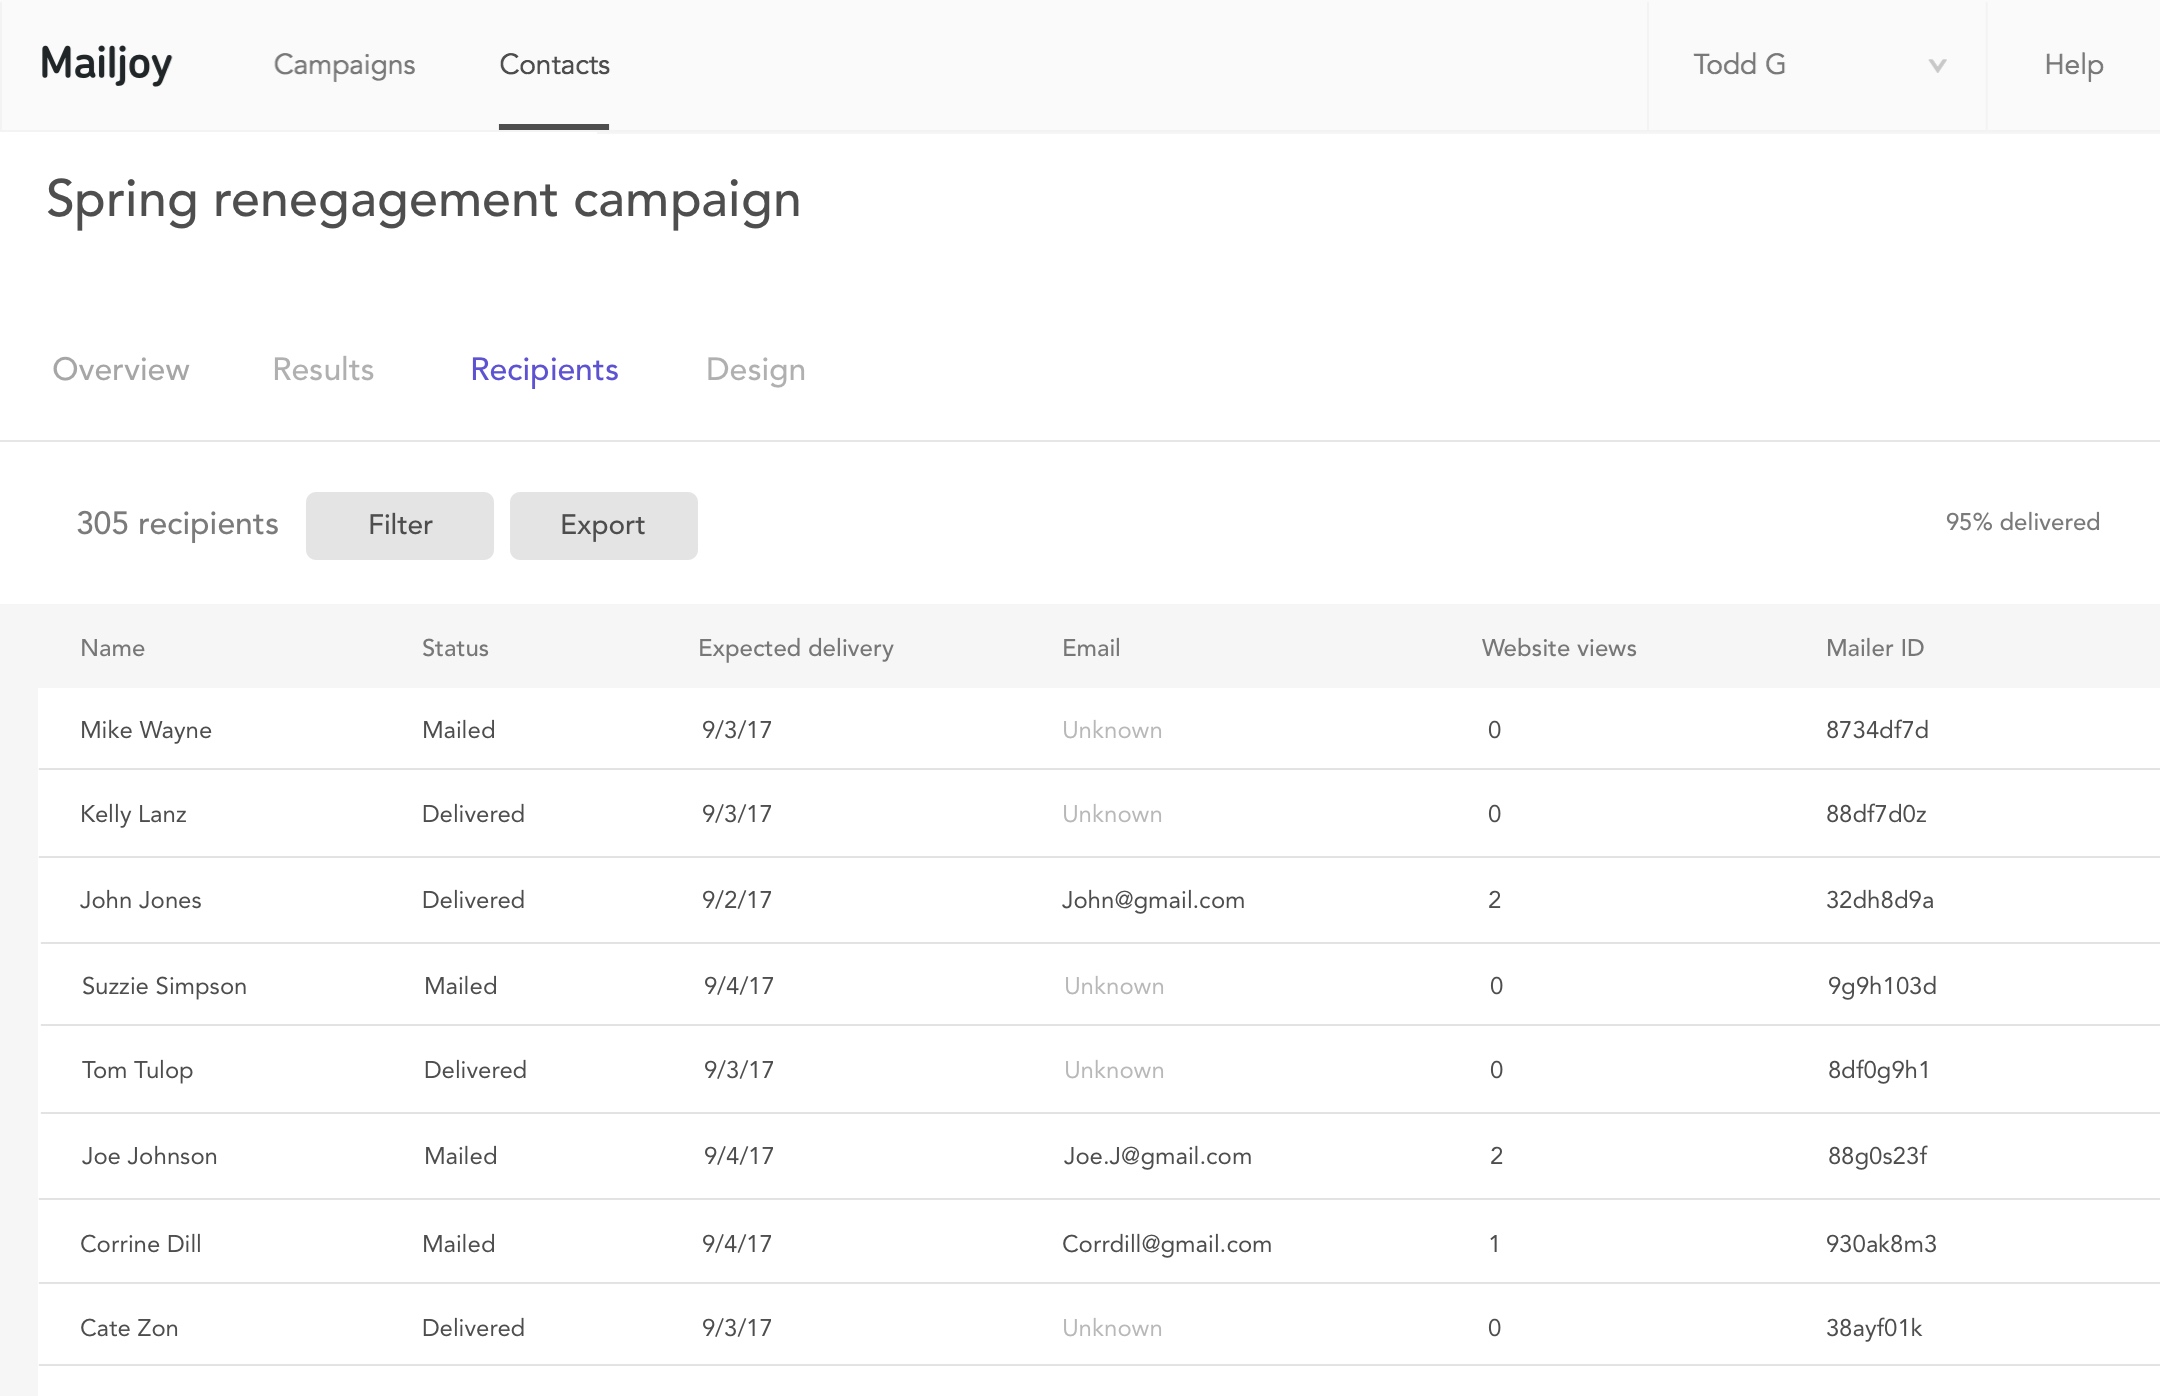 Track the delivery status and conversions of your direct mail campaign